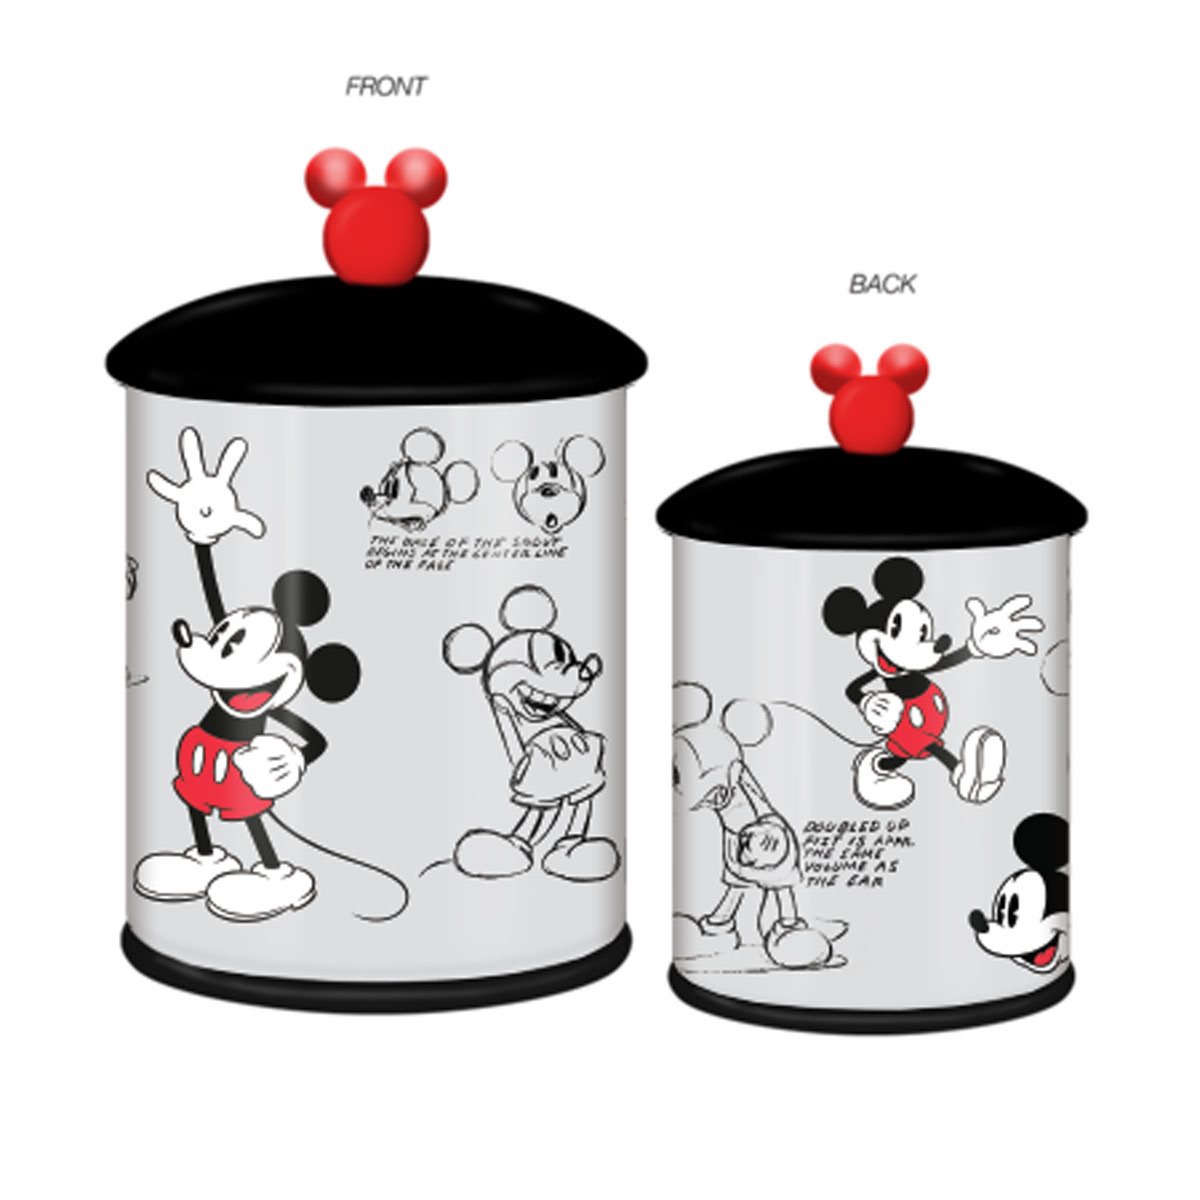 Set of 2 Disney Mickey Mouse Metal Kitchen Canisters 